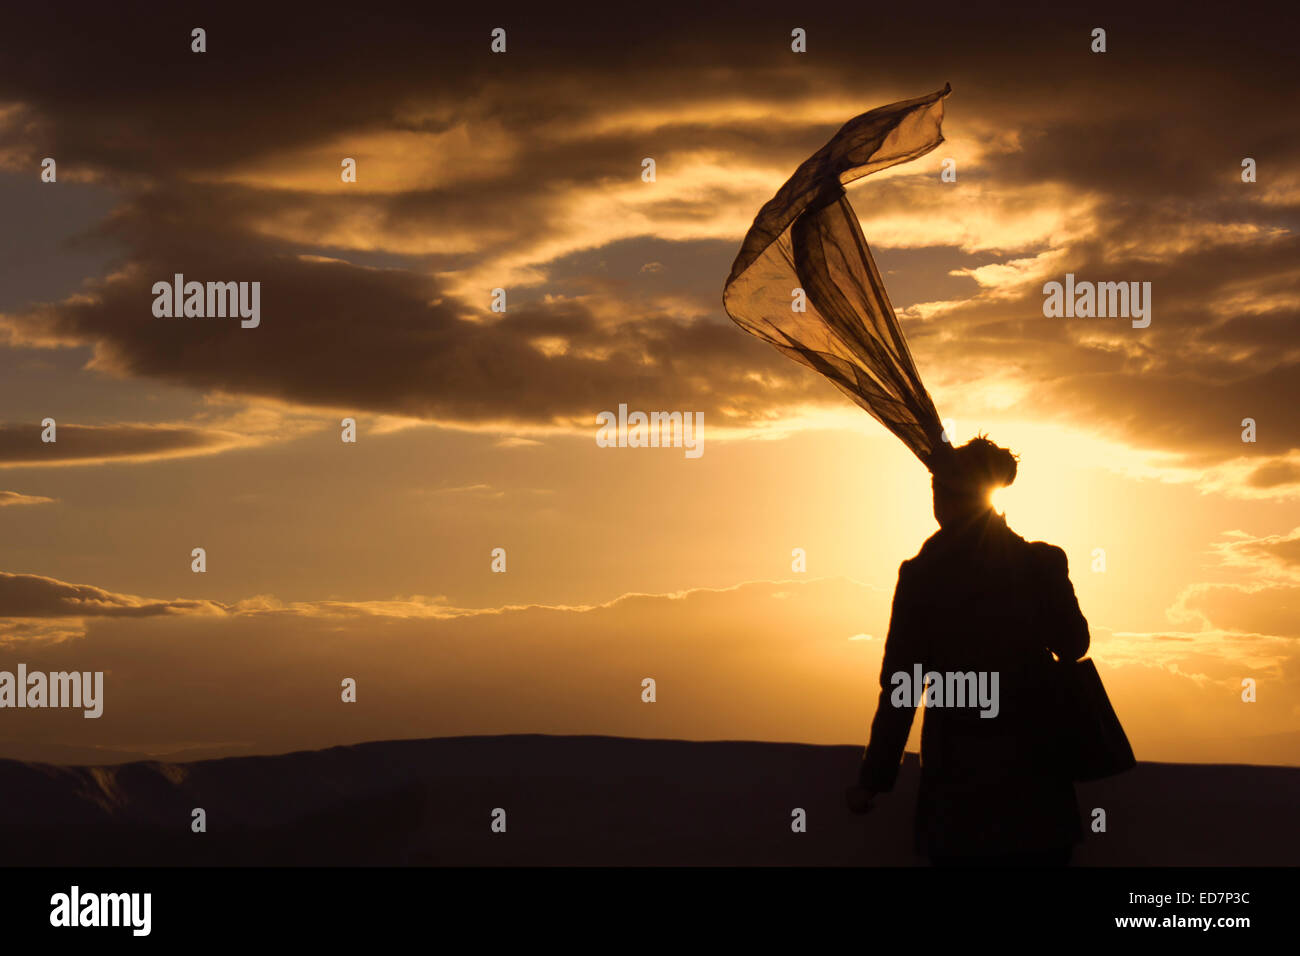 Silhouette of woman wearing scarf blowing in the wind watching the sunset. Stock Photo